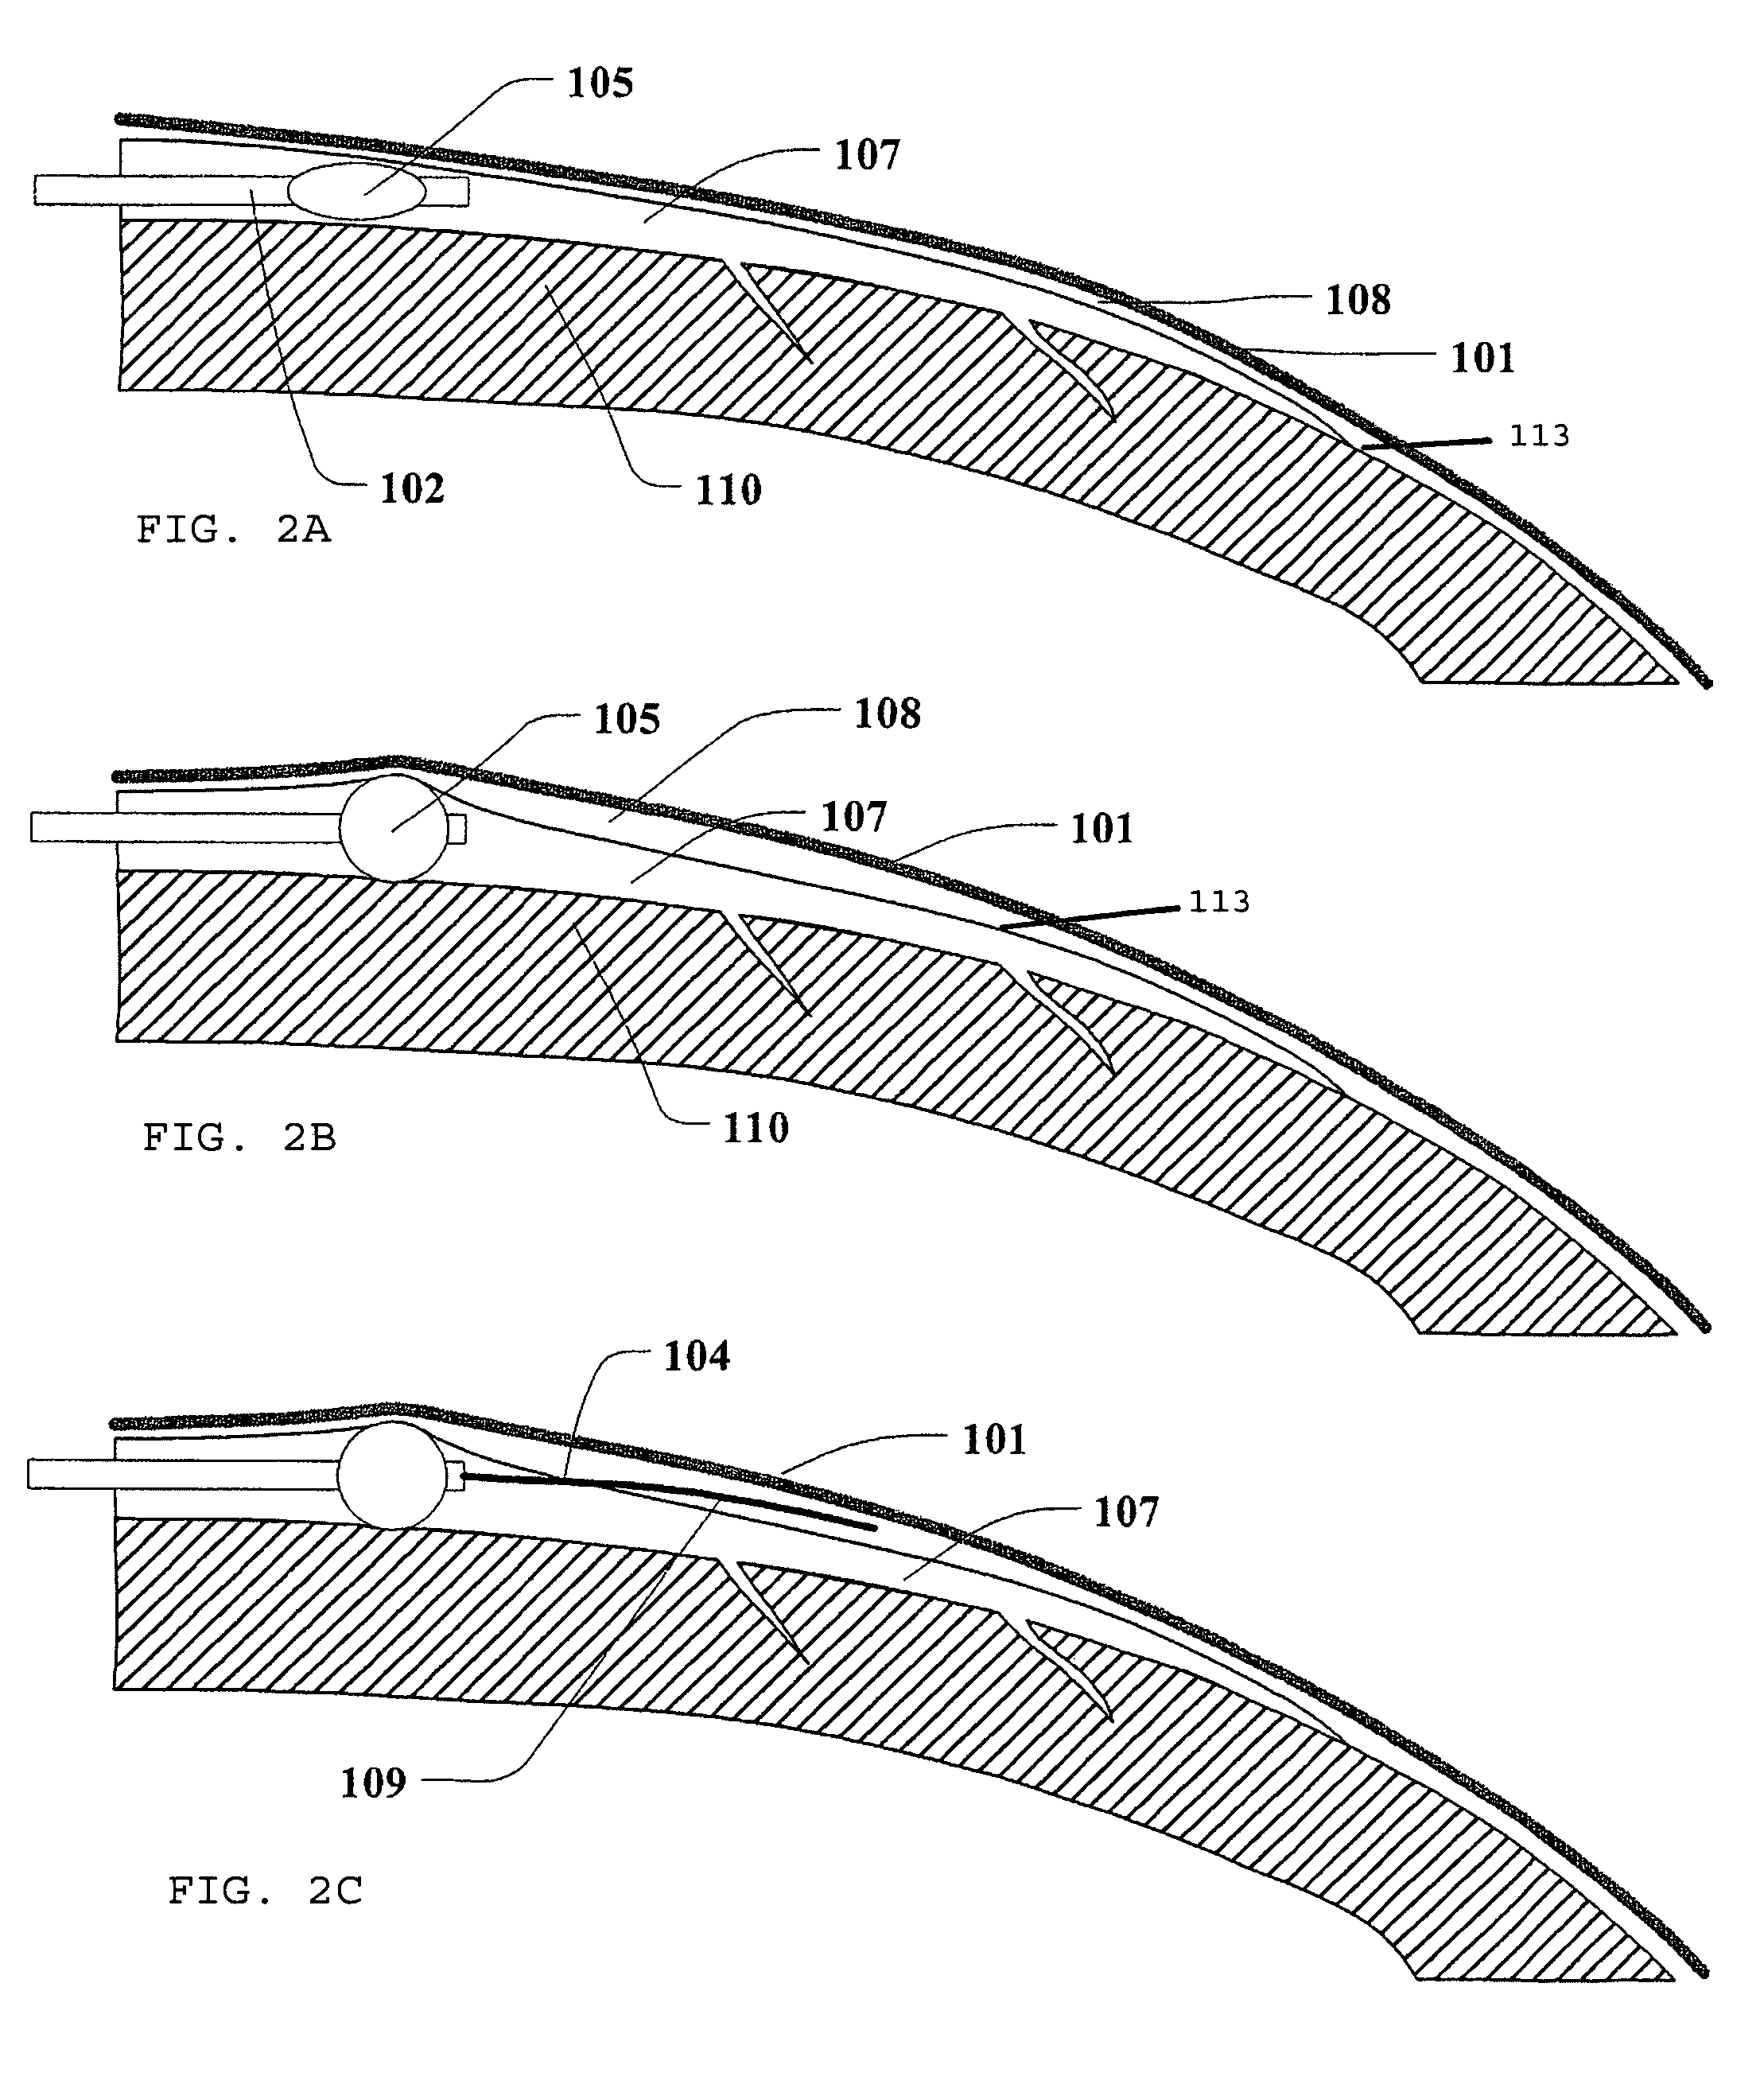 Method and device for accessing a pericardial space